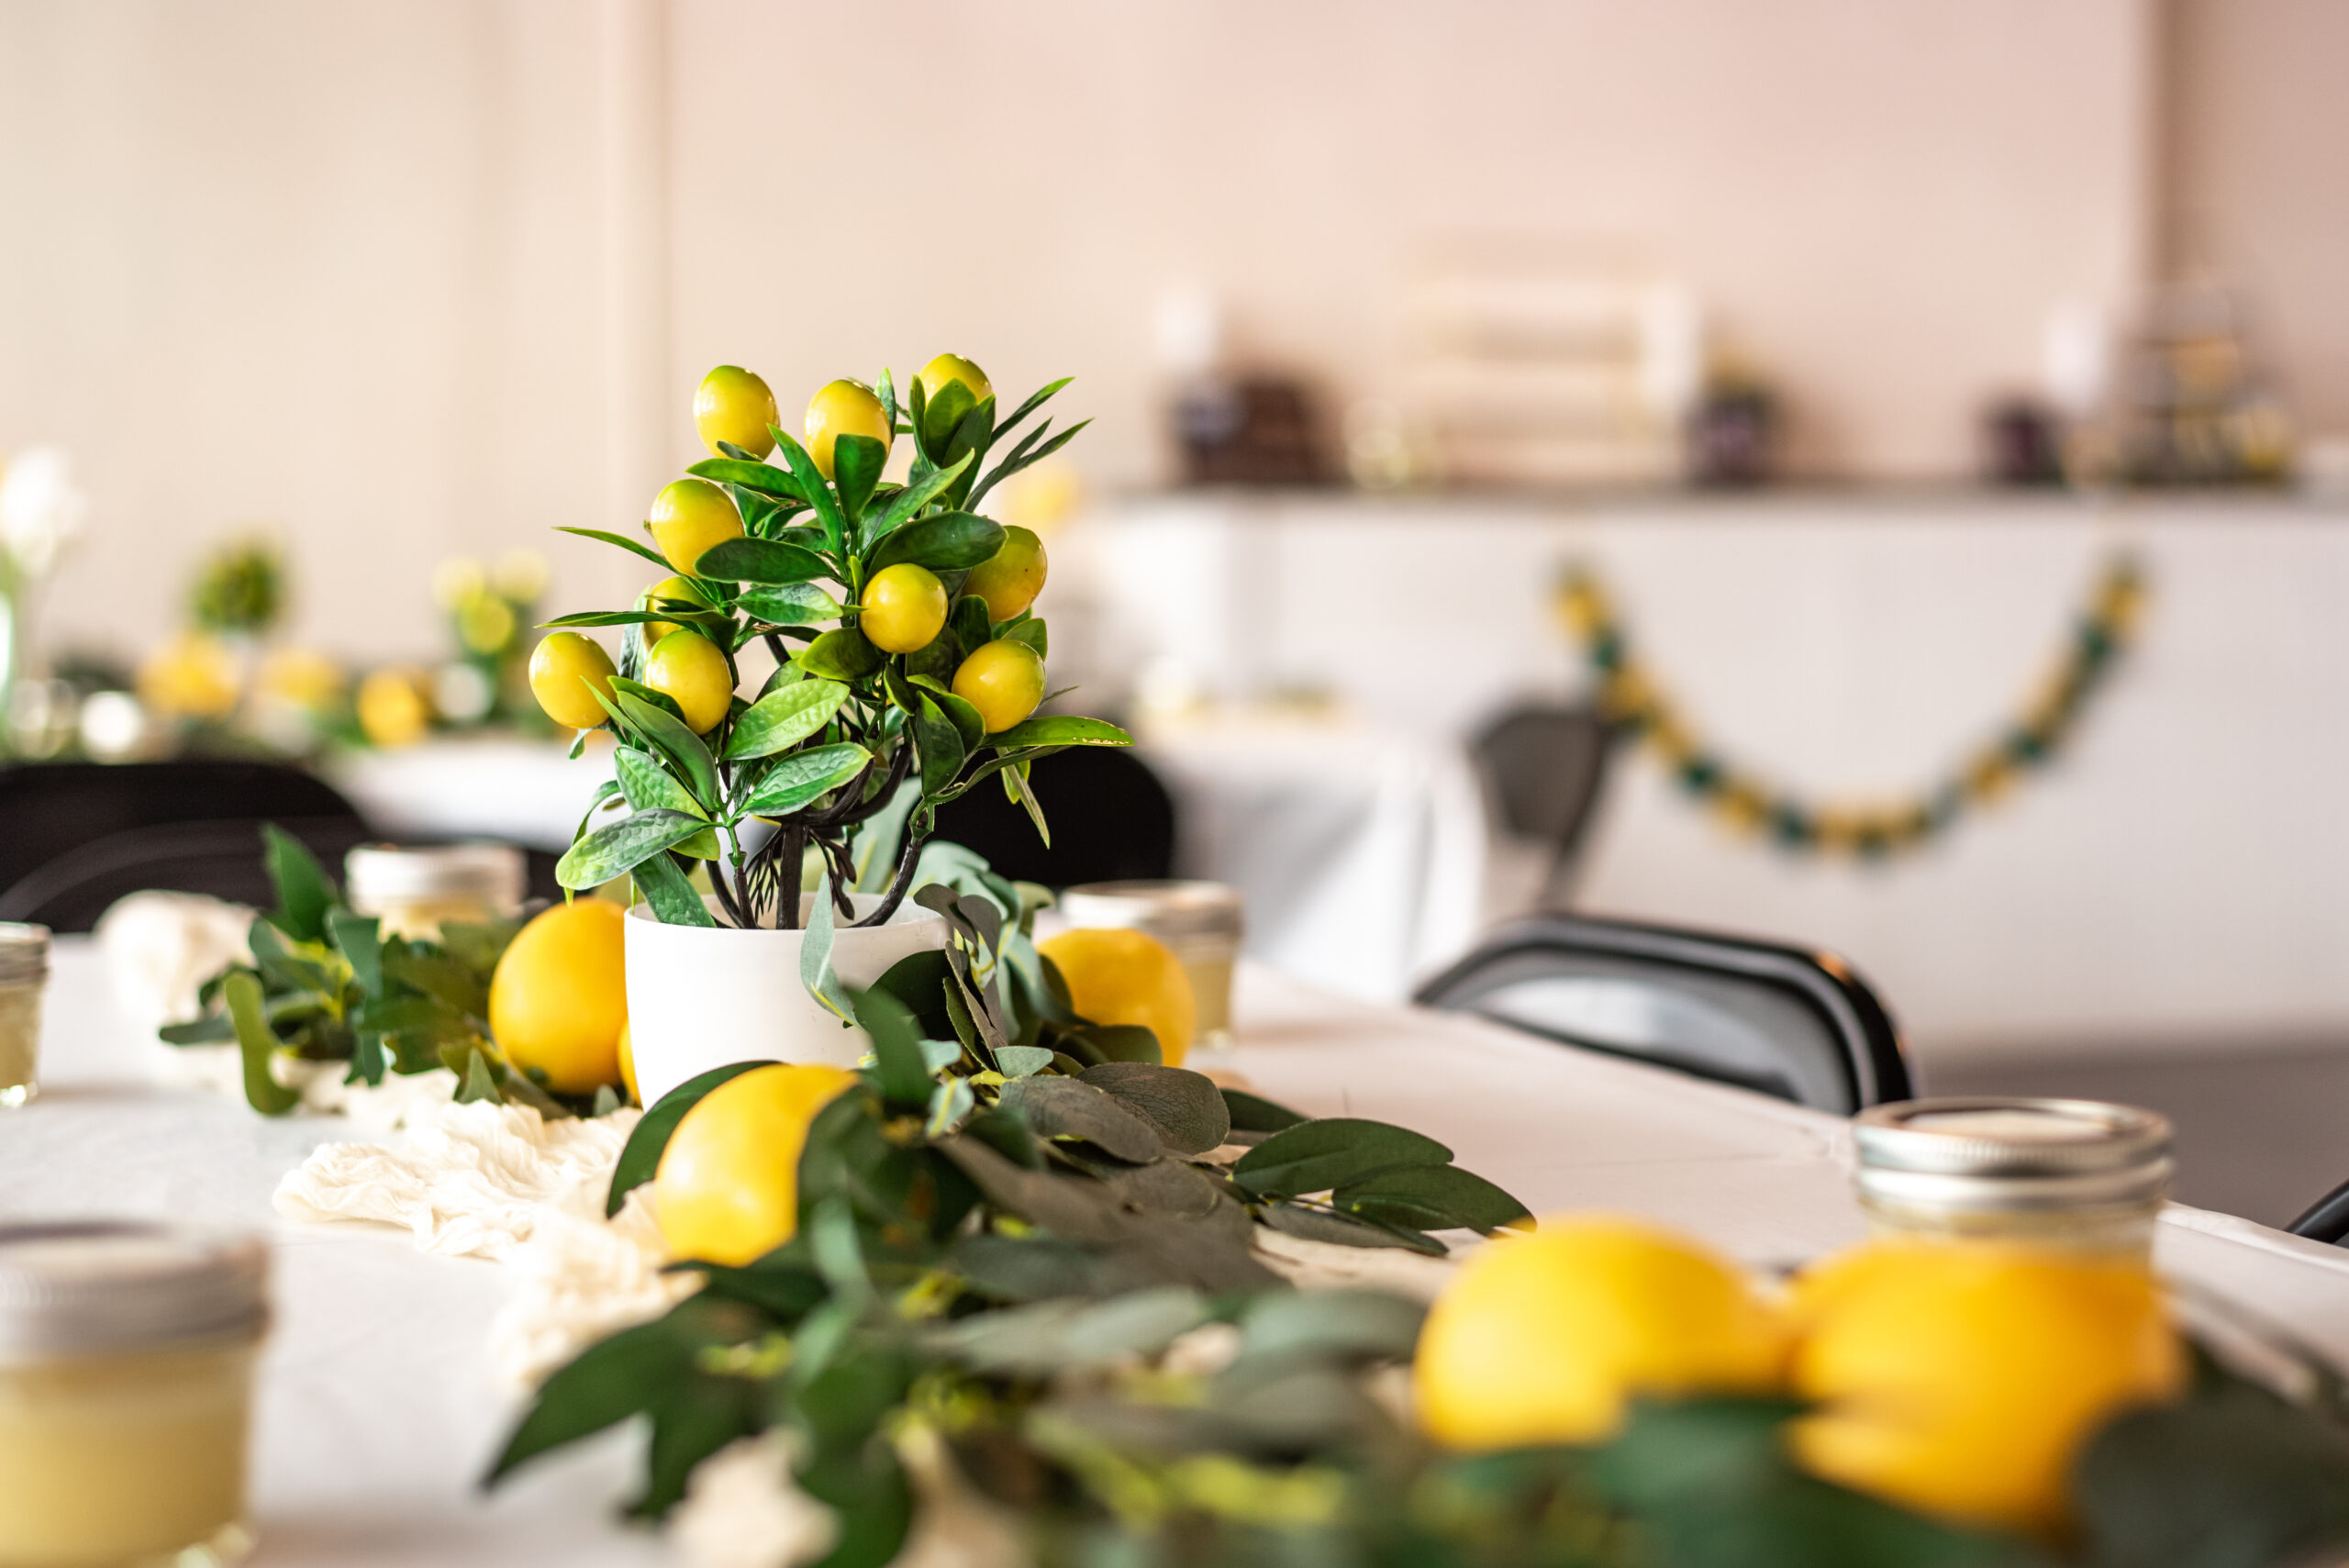 Image shows The Magnolia Room's party space decorated with lemons and greenery. The style is polished and fun.